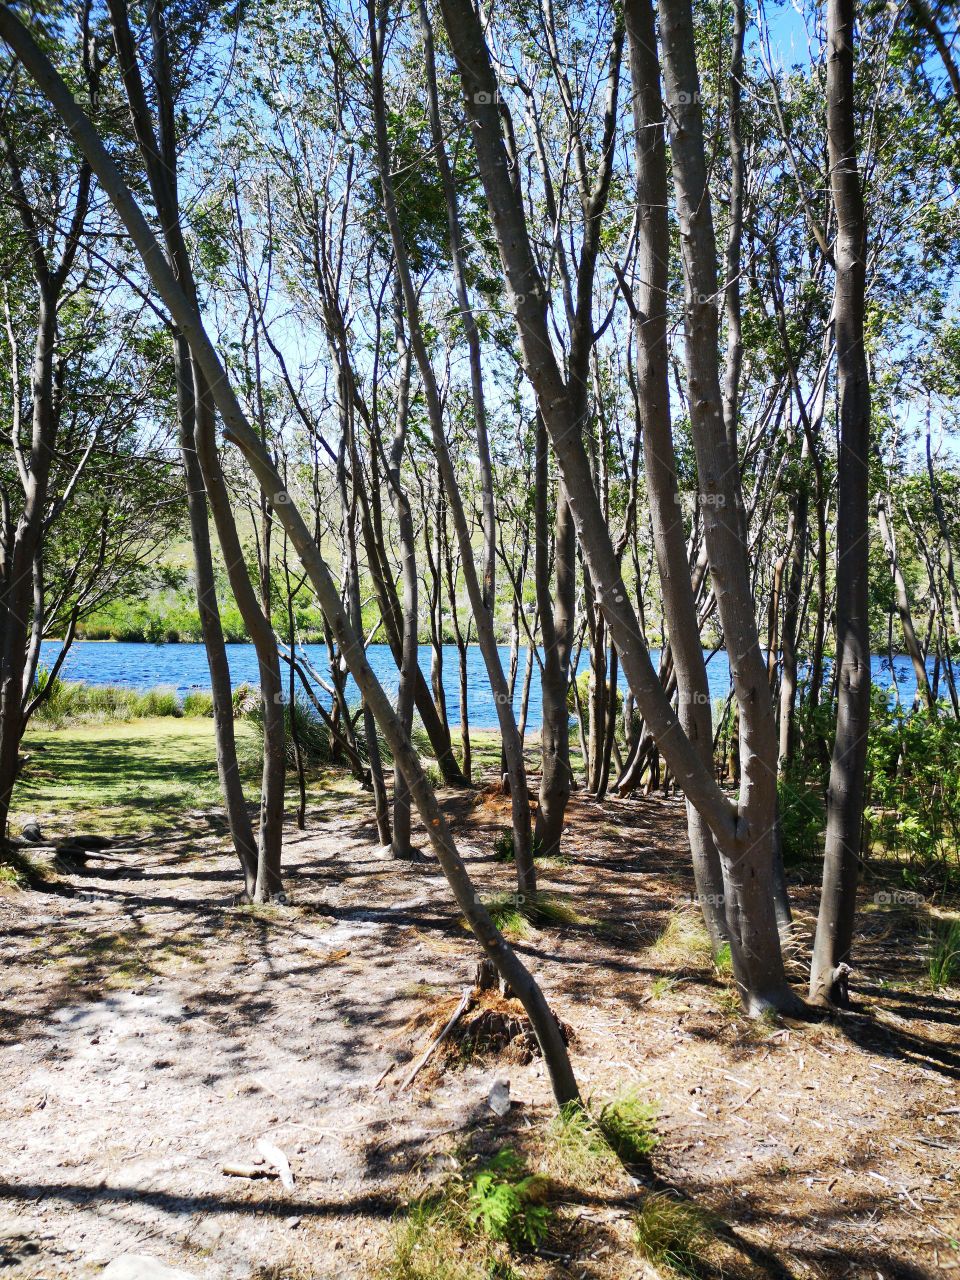 View of lake through forest